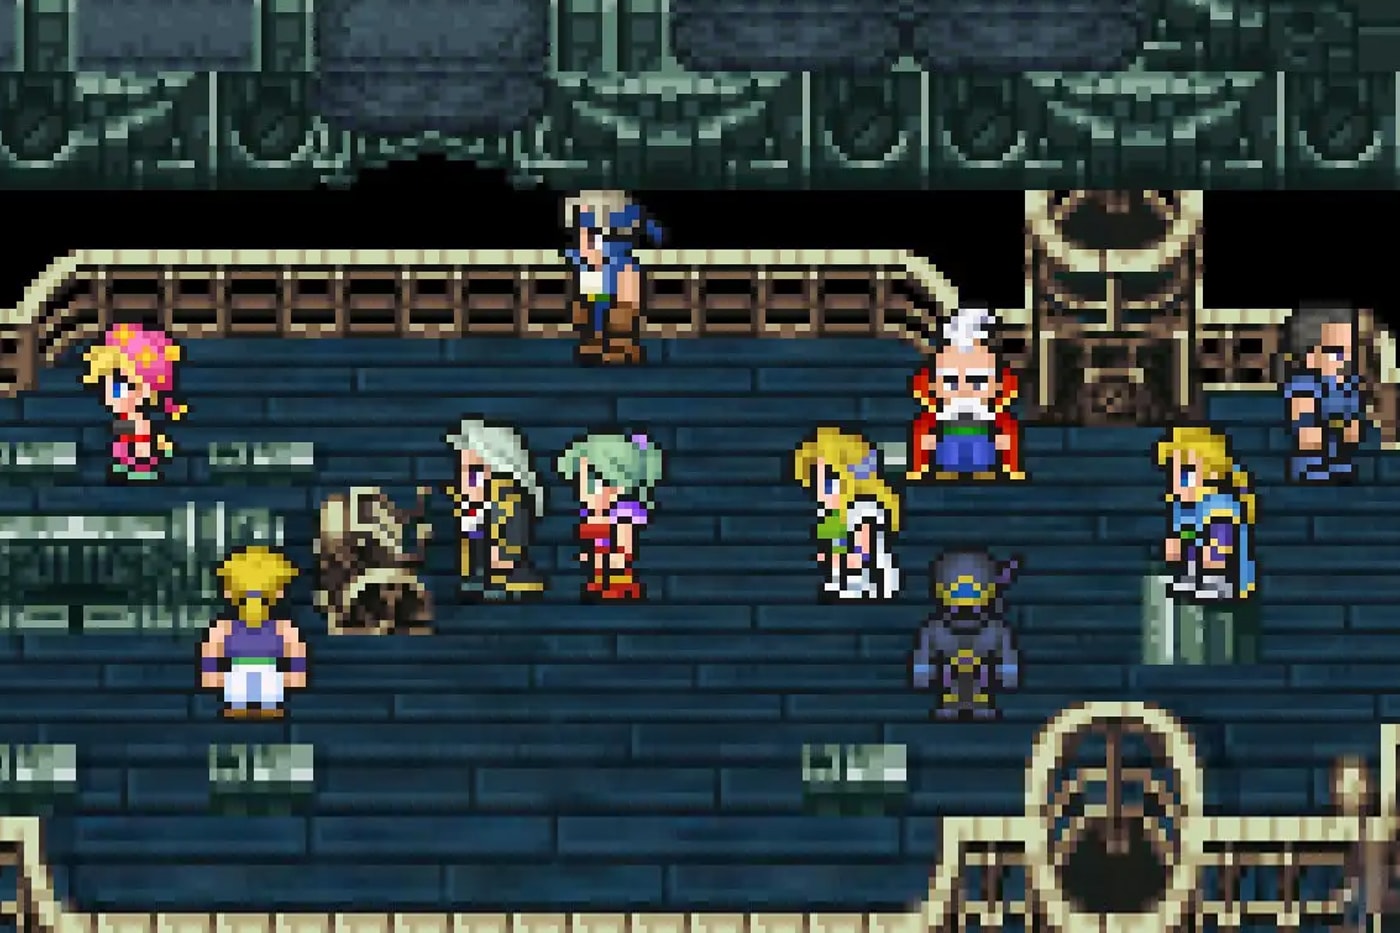 Final Fantasy 6 Pixel Remaster set to launch February 2022